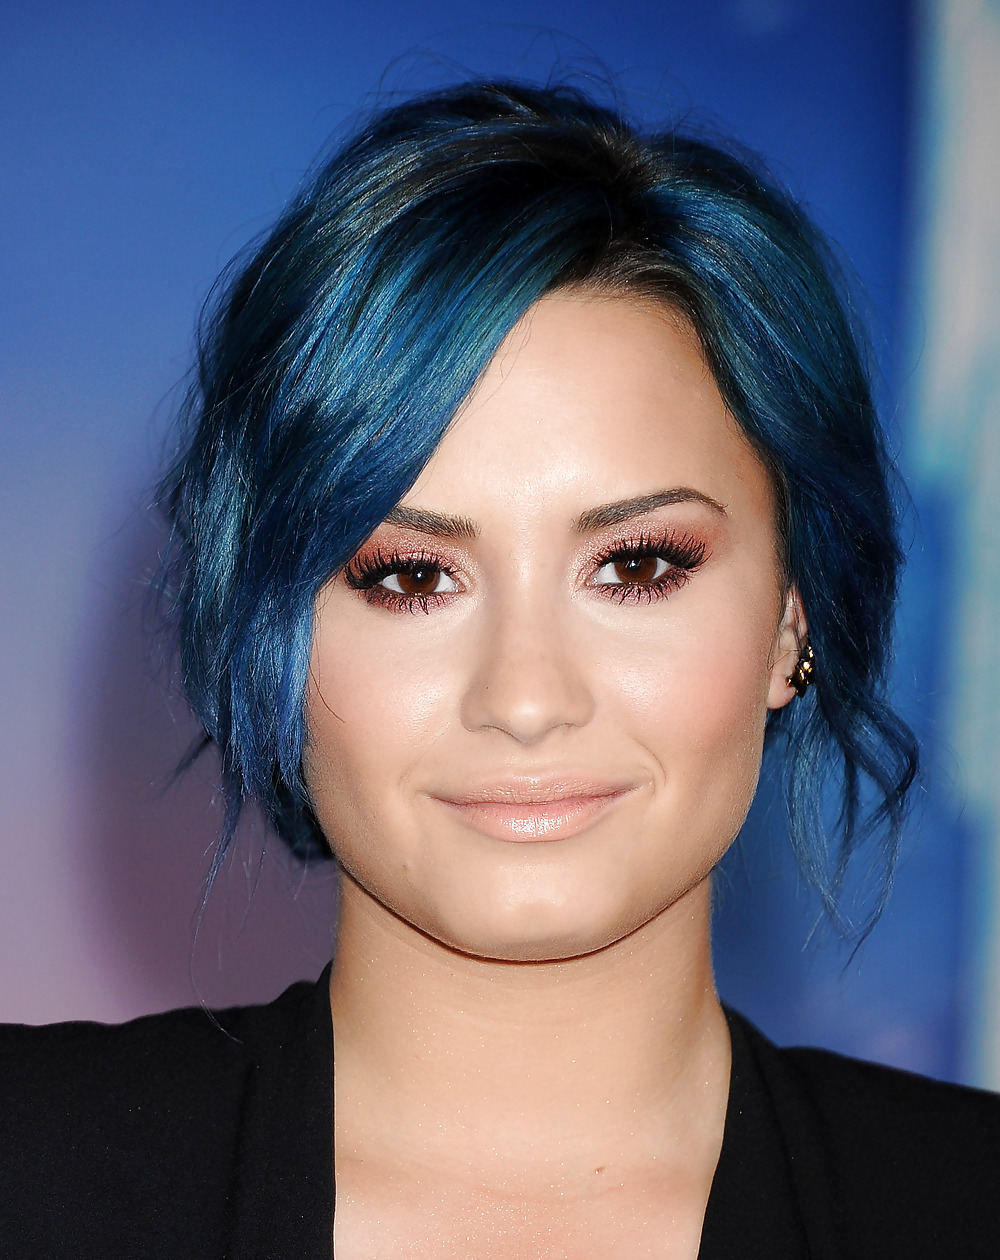 Demi Lovato with blue hair and business style #22180070